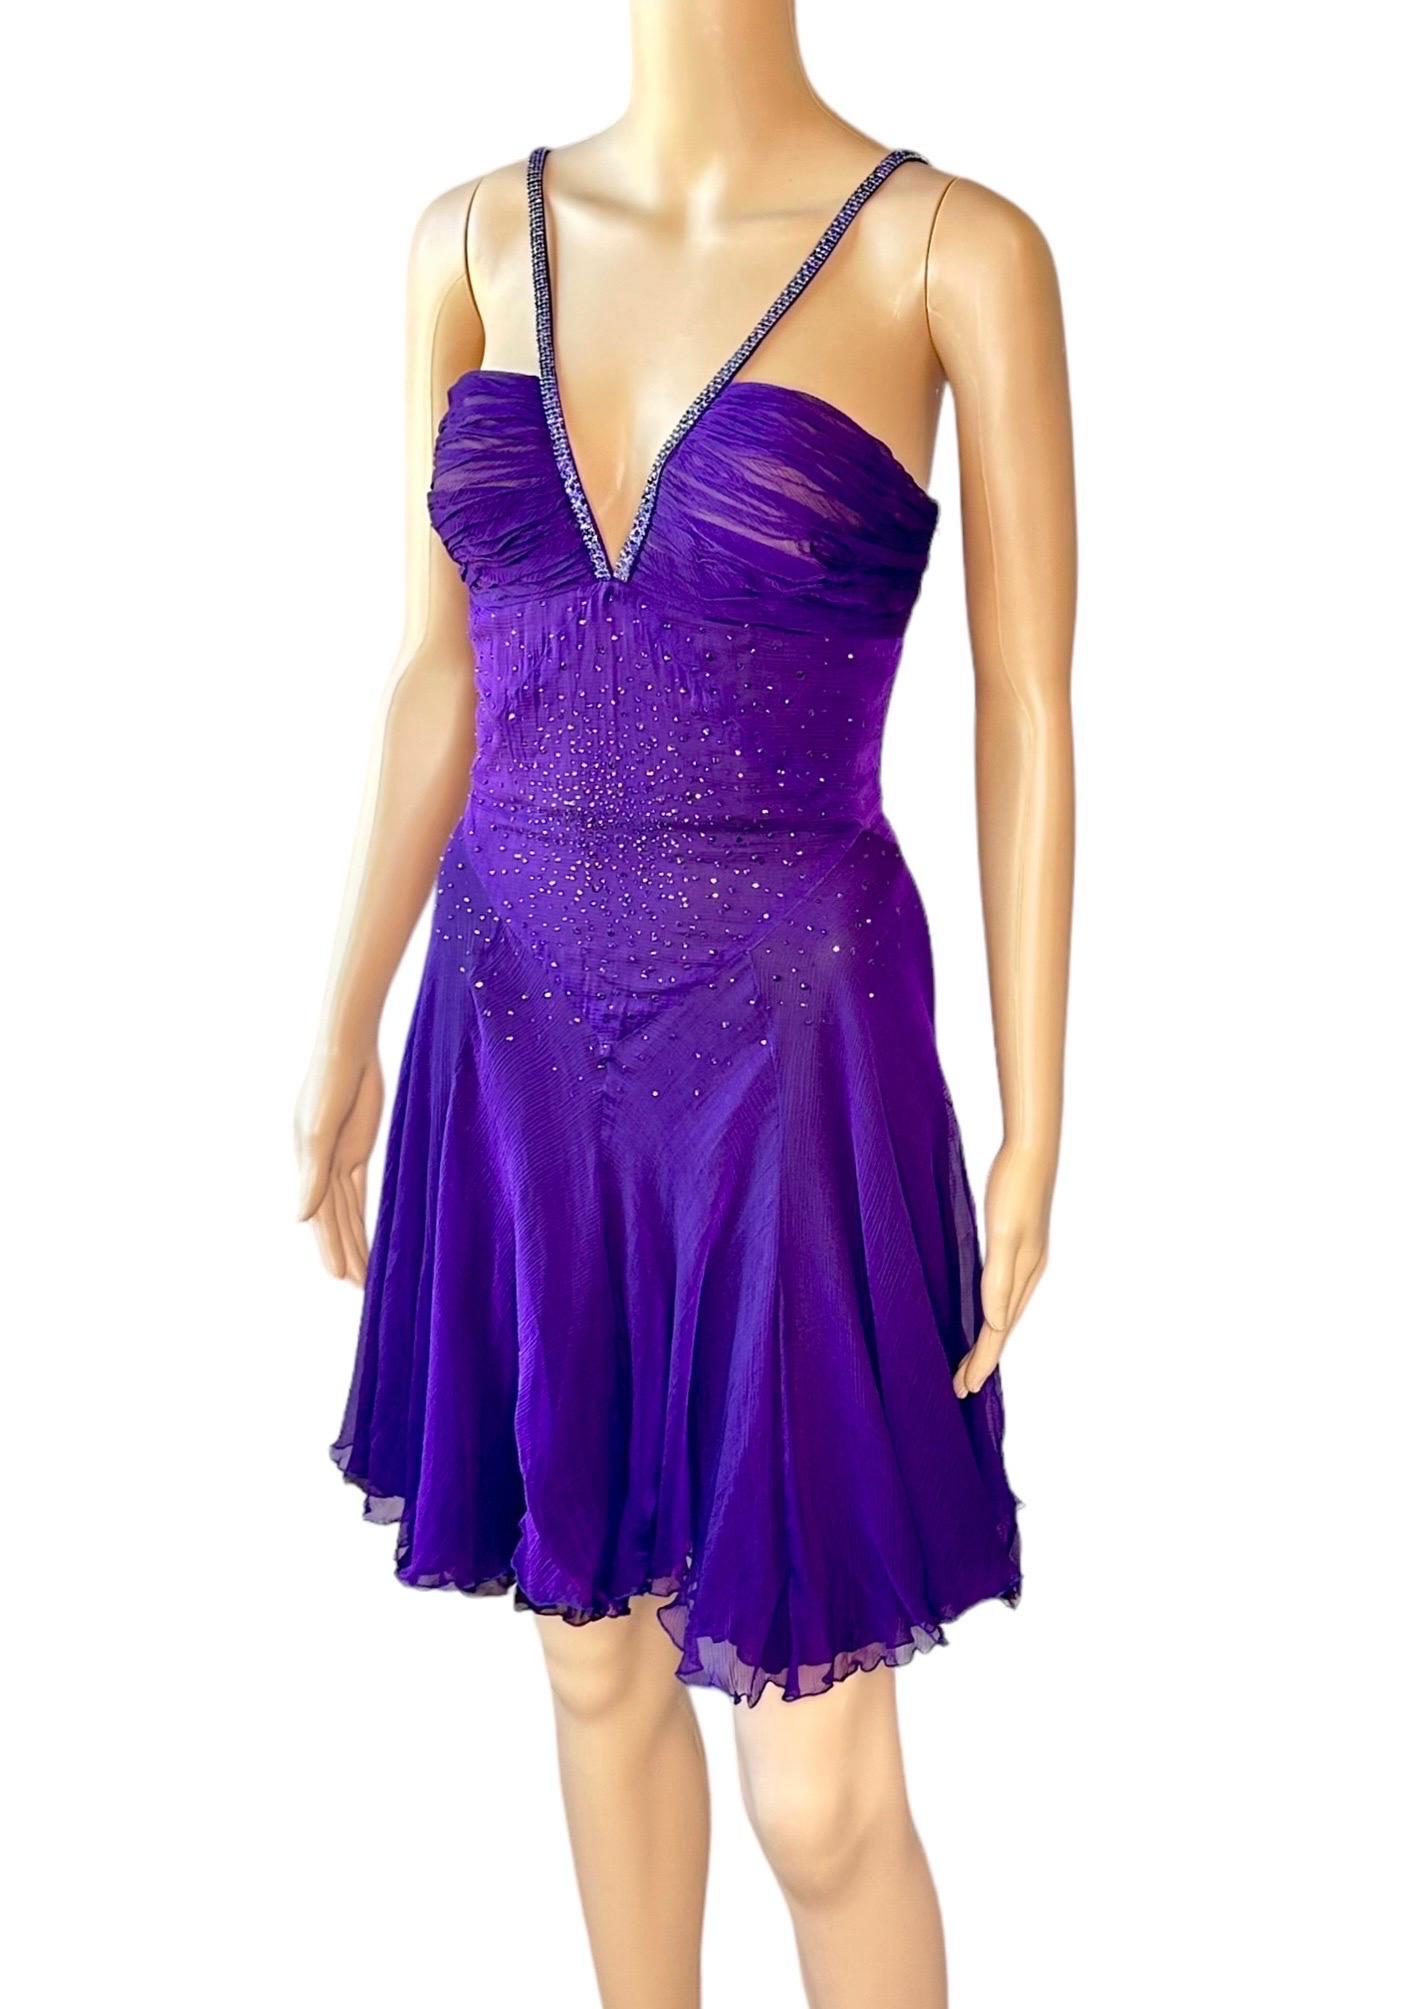 Versace c.2007 Crystal Embellished Plunging Neckline Semi-Sheer Purple Dress In Good Condition For Sale In Naples, FL